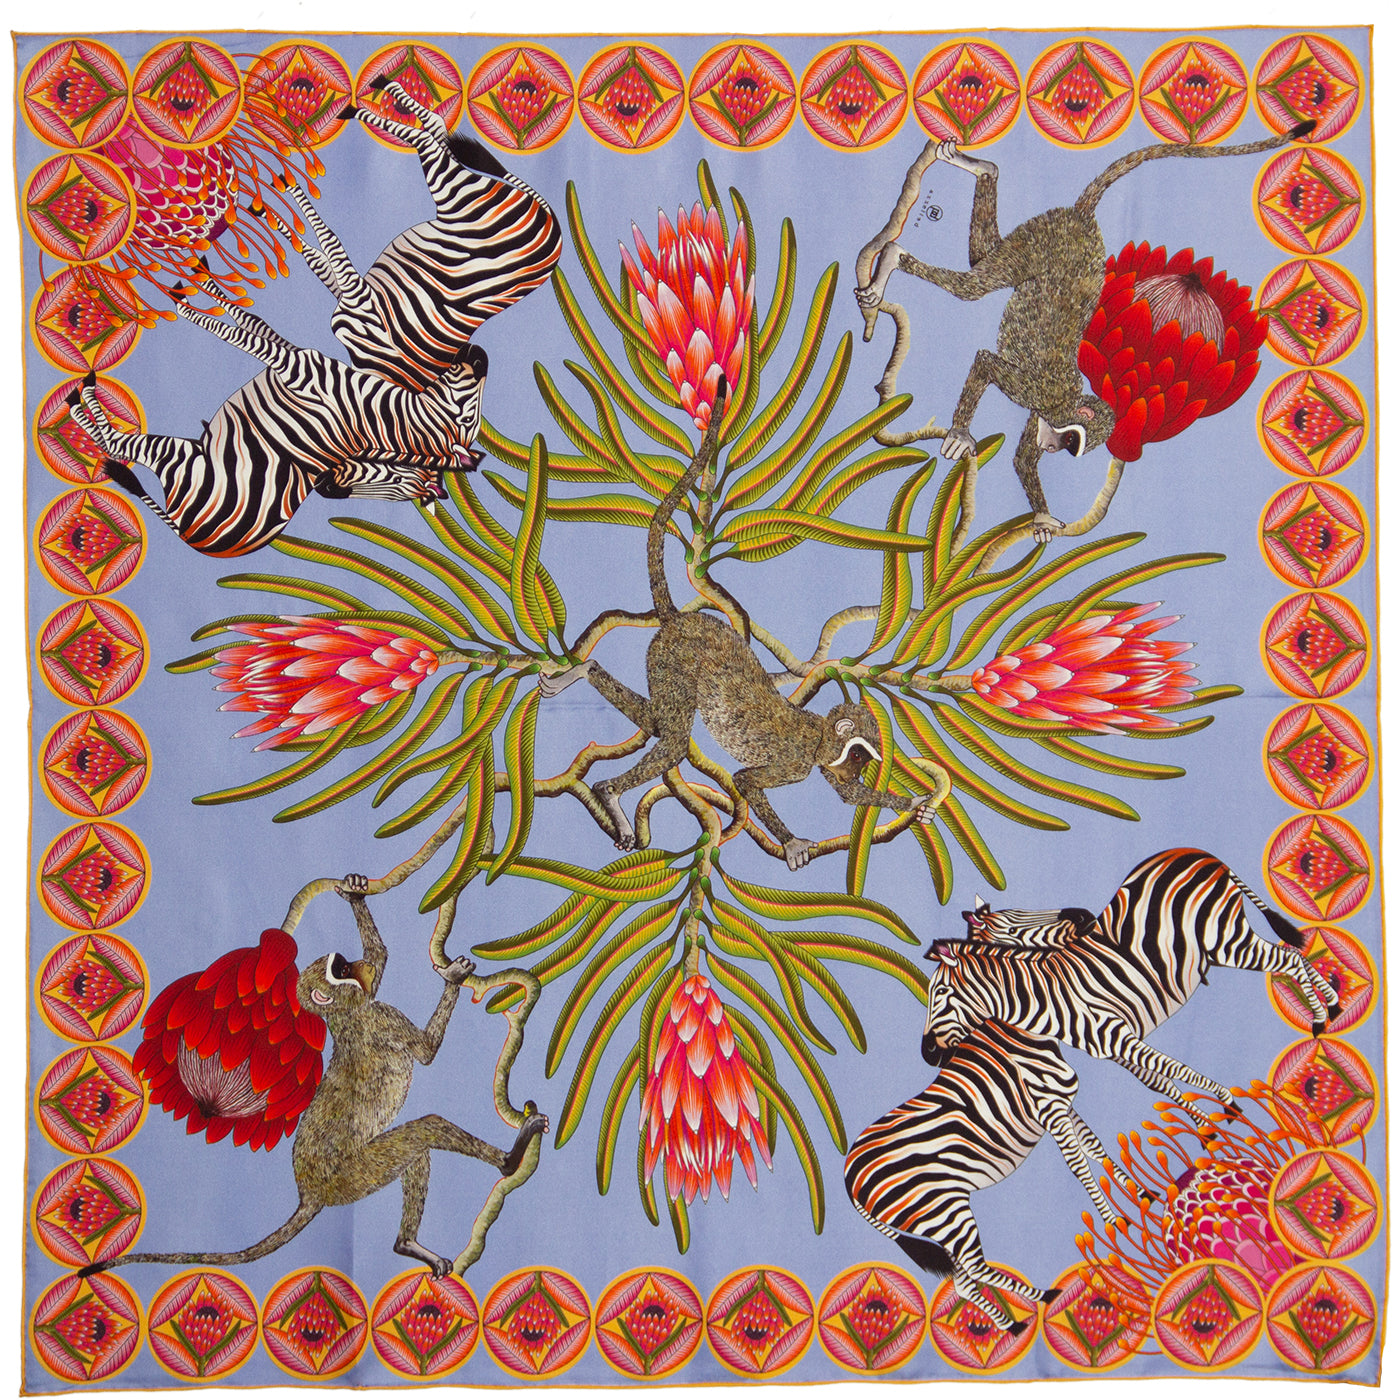 Blue and light blue silk scarf with Zebras Monkies and Protea flowers